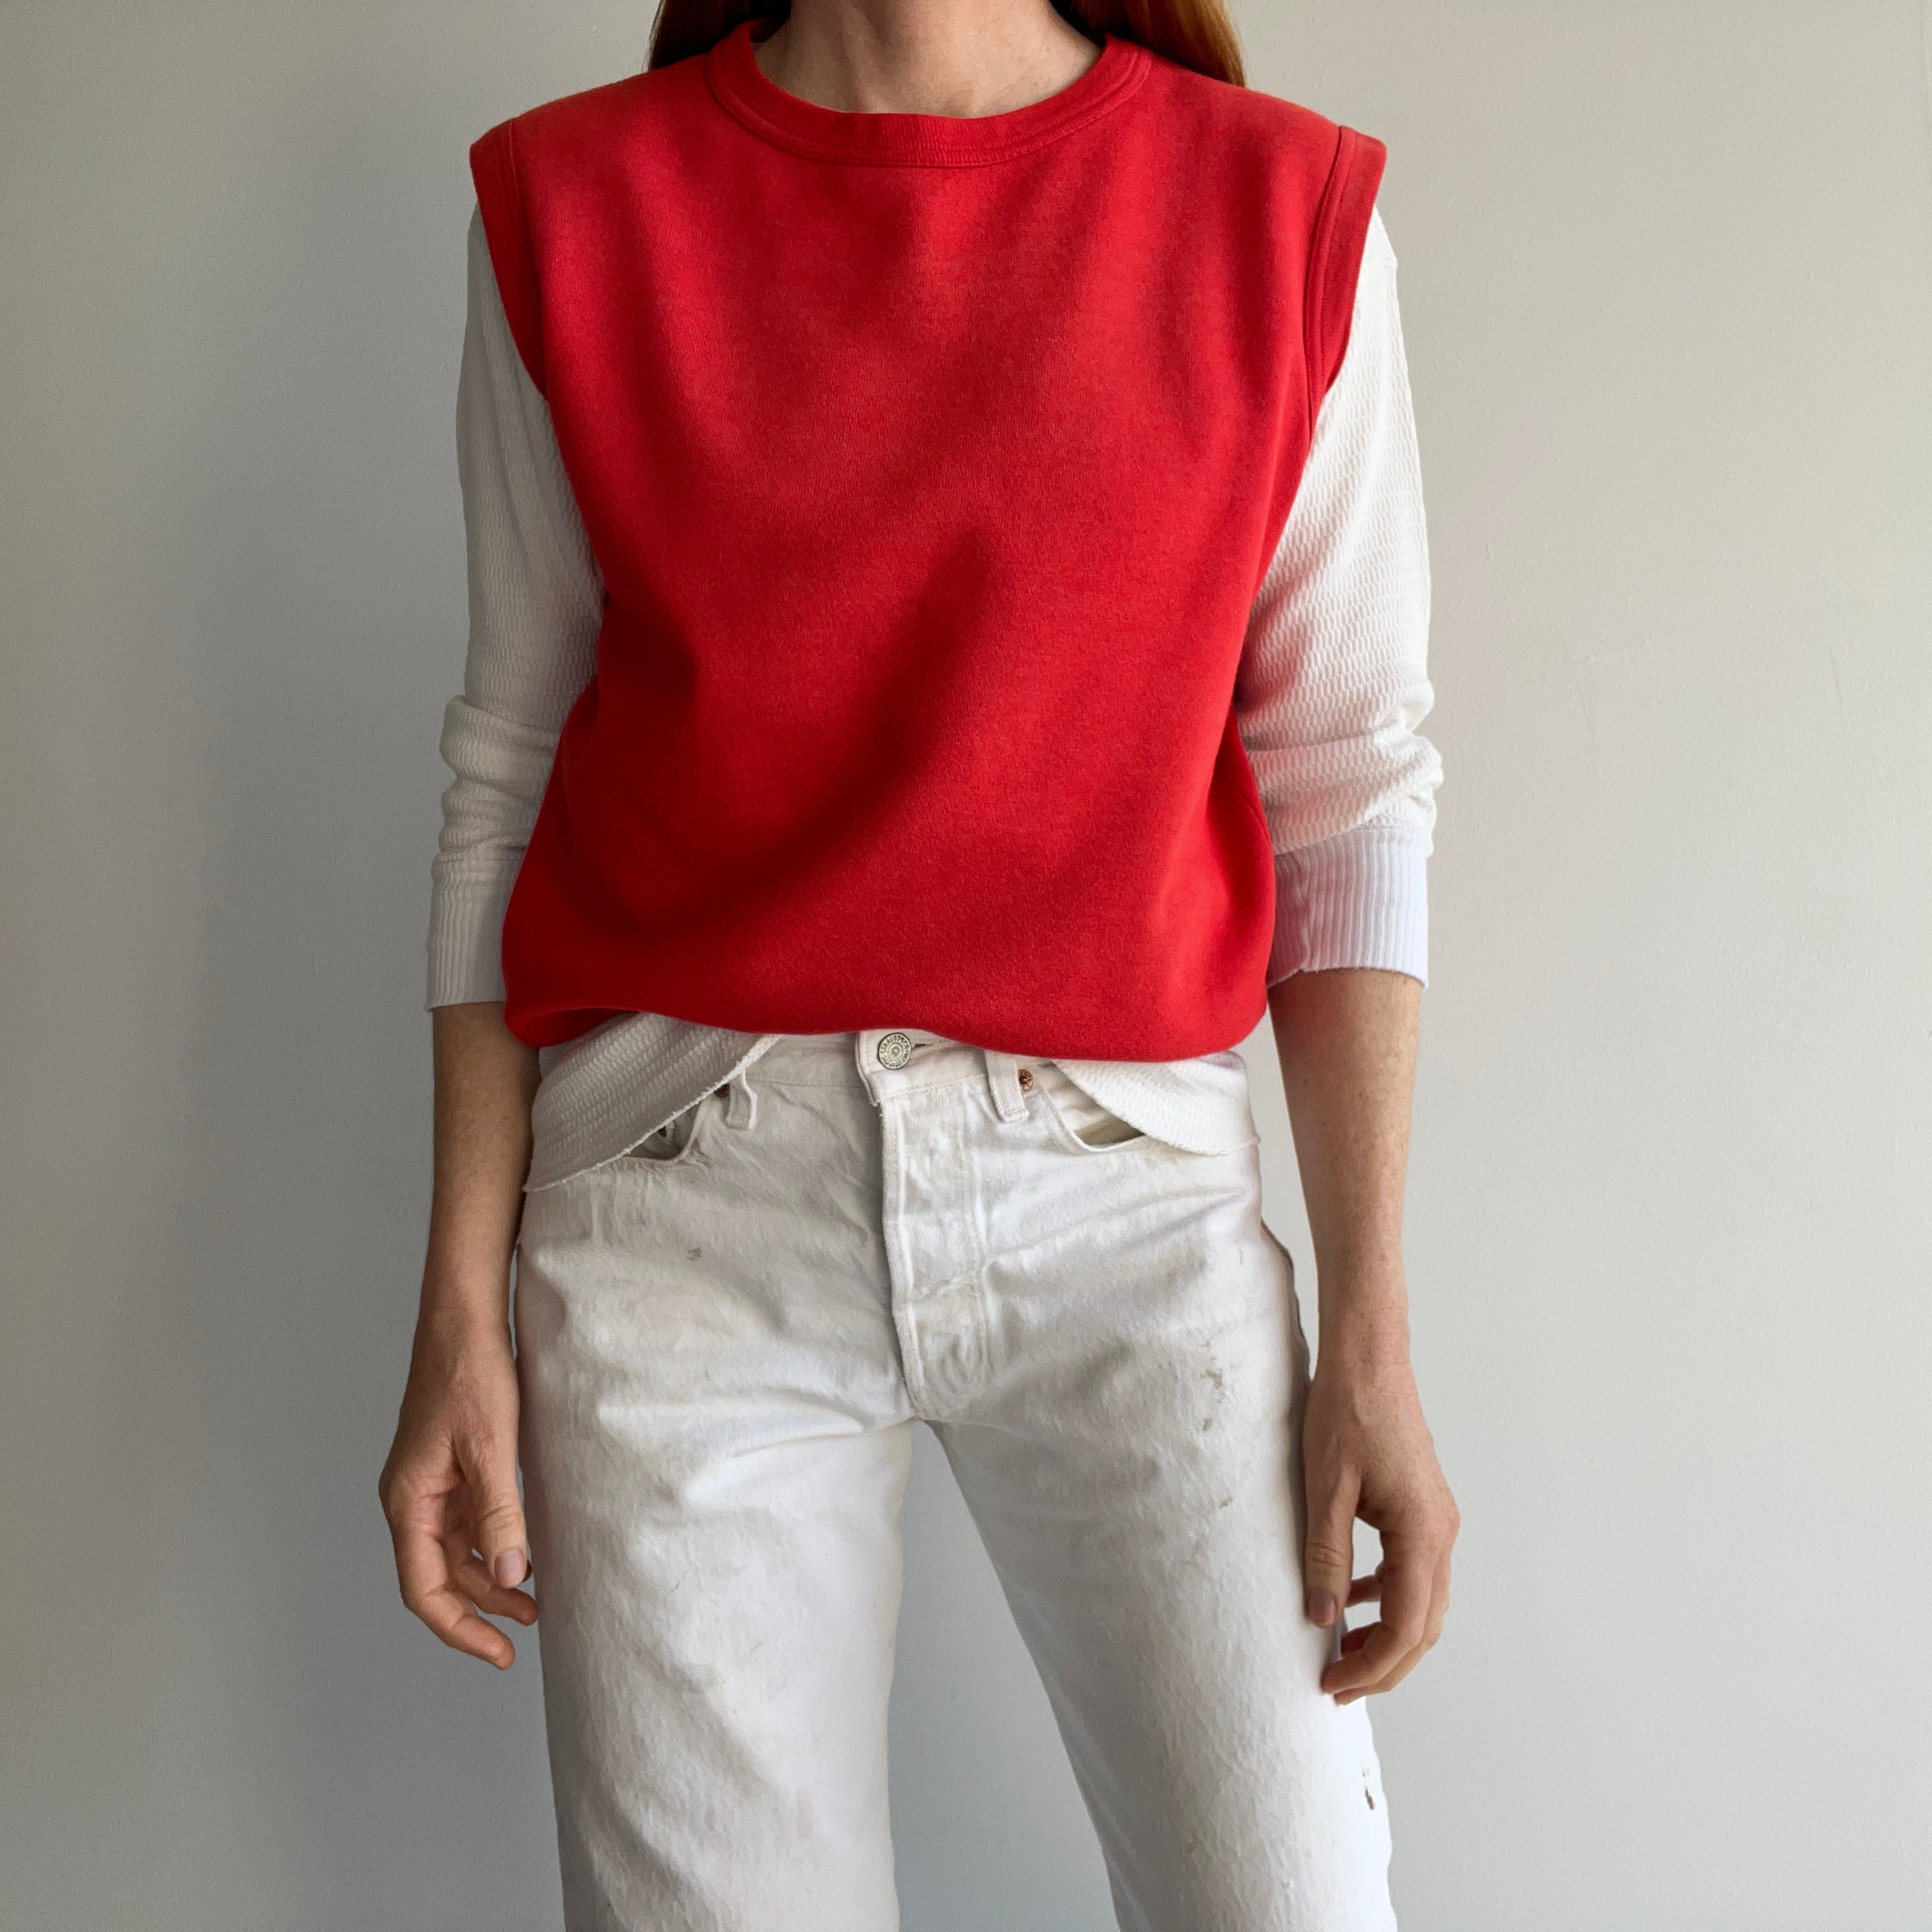 1980s Sun Faded Red Warm Up Sweatshirt Vest - YES!!!!